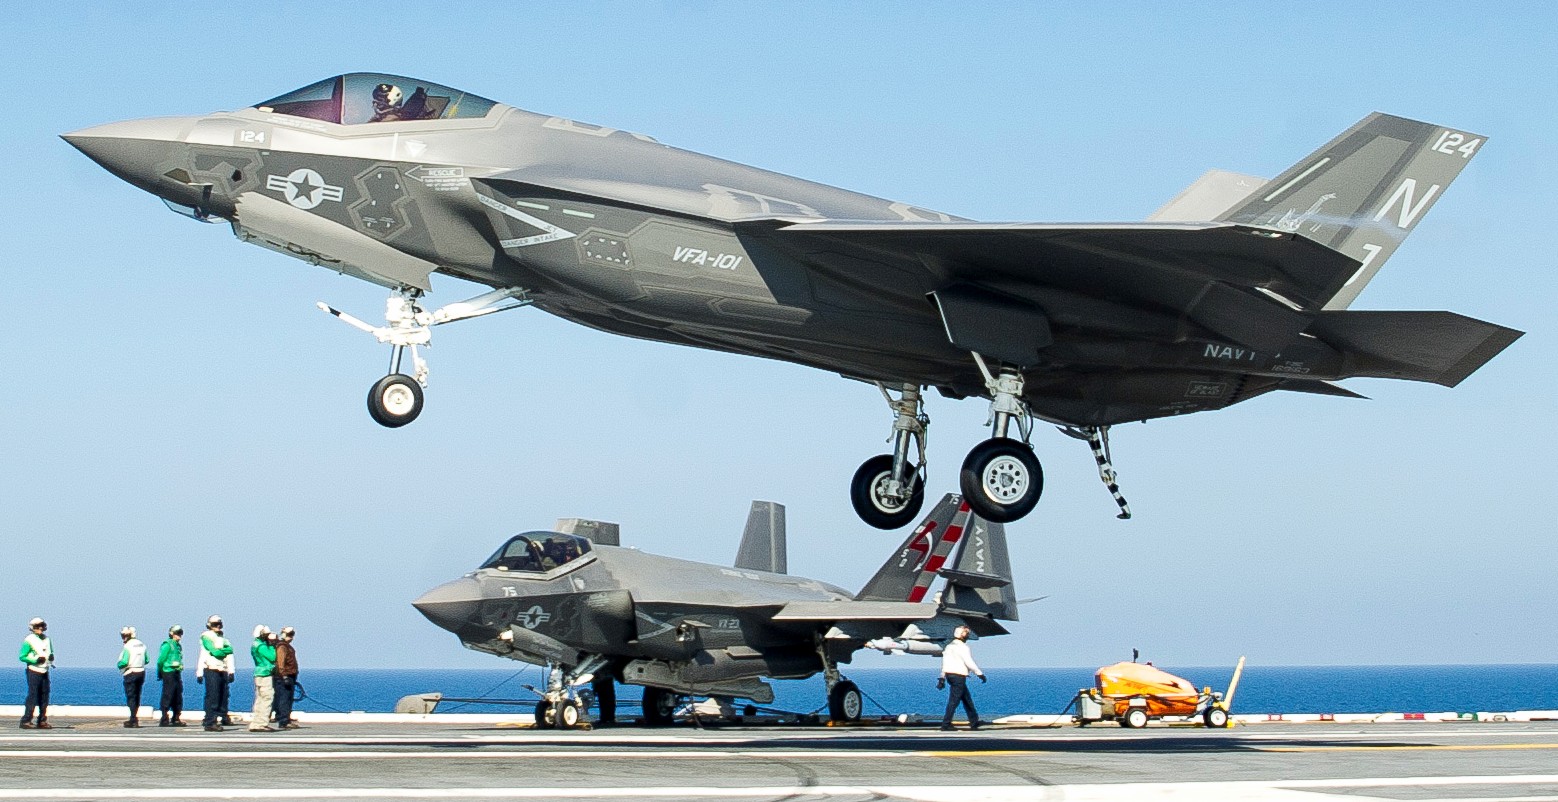 vfa-101 grim reapers strike fighter squadron us navy f-35c lightning jsf frs 39